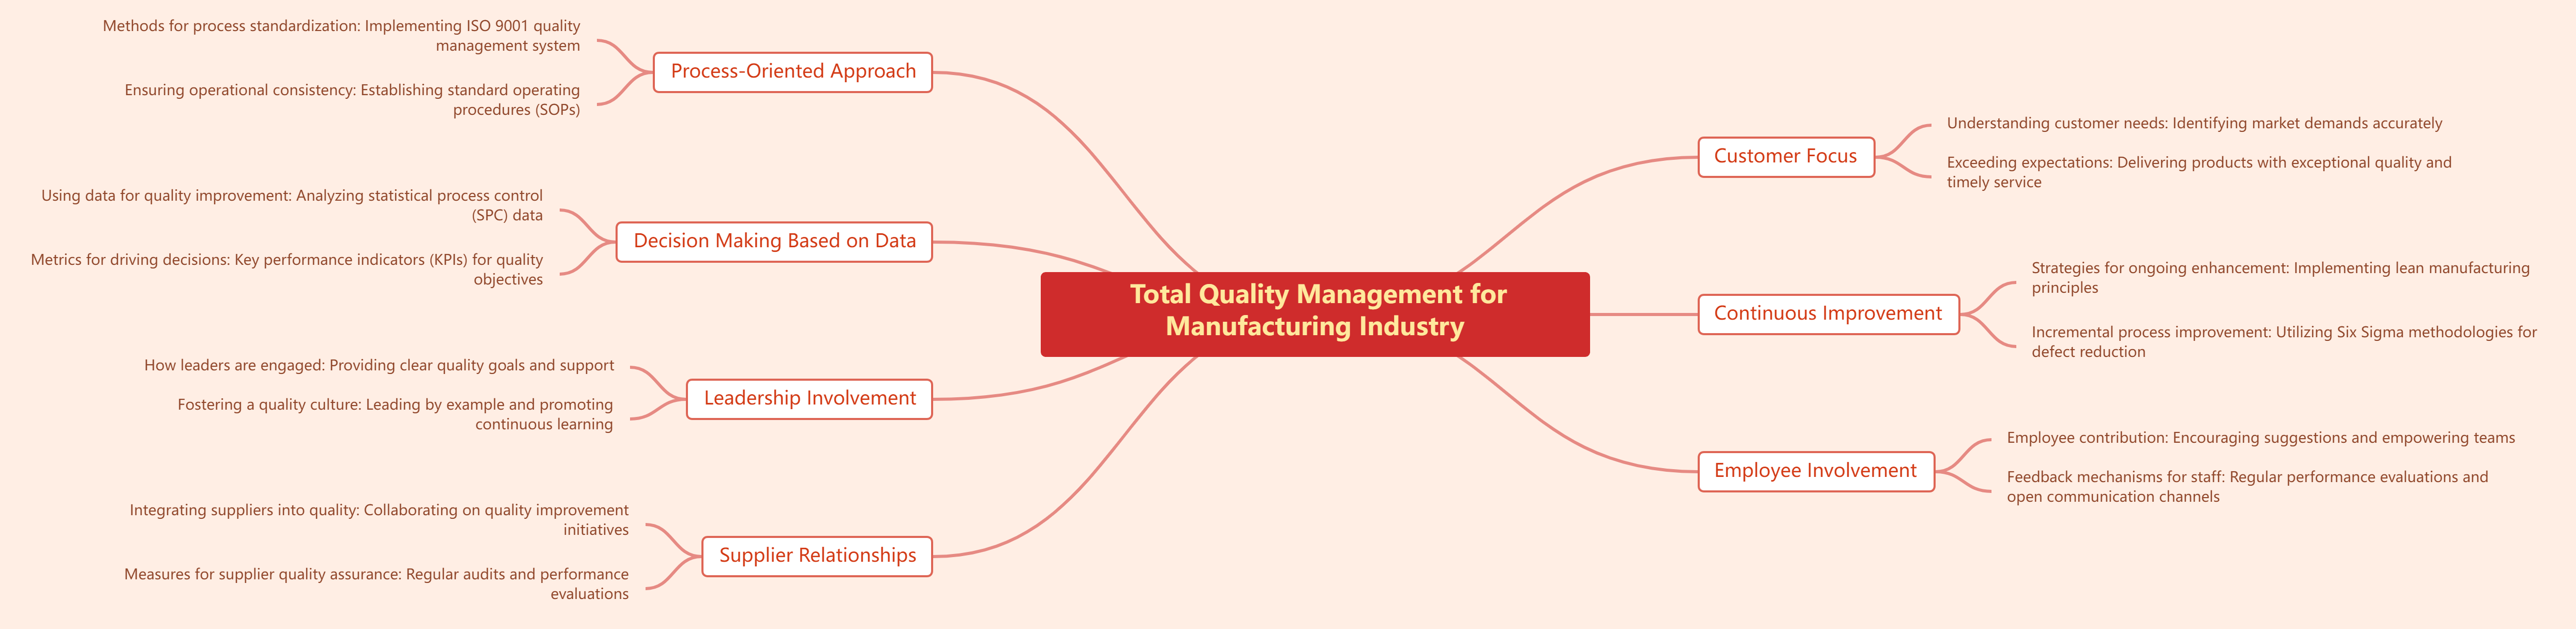 Total Quality Management For Manufacturing Industry 